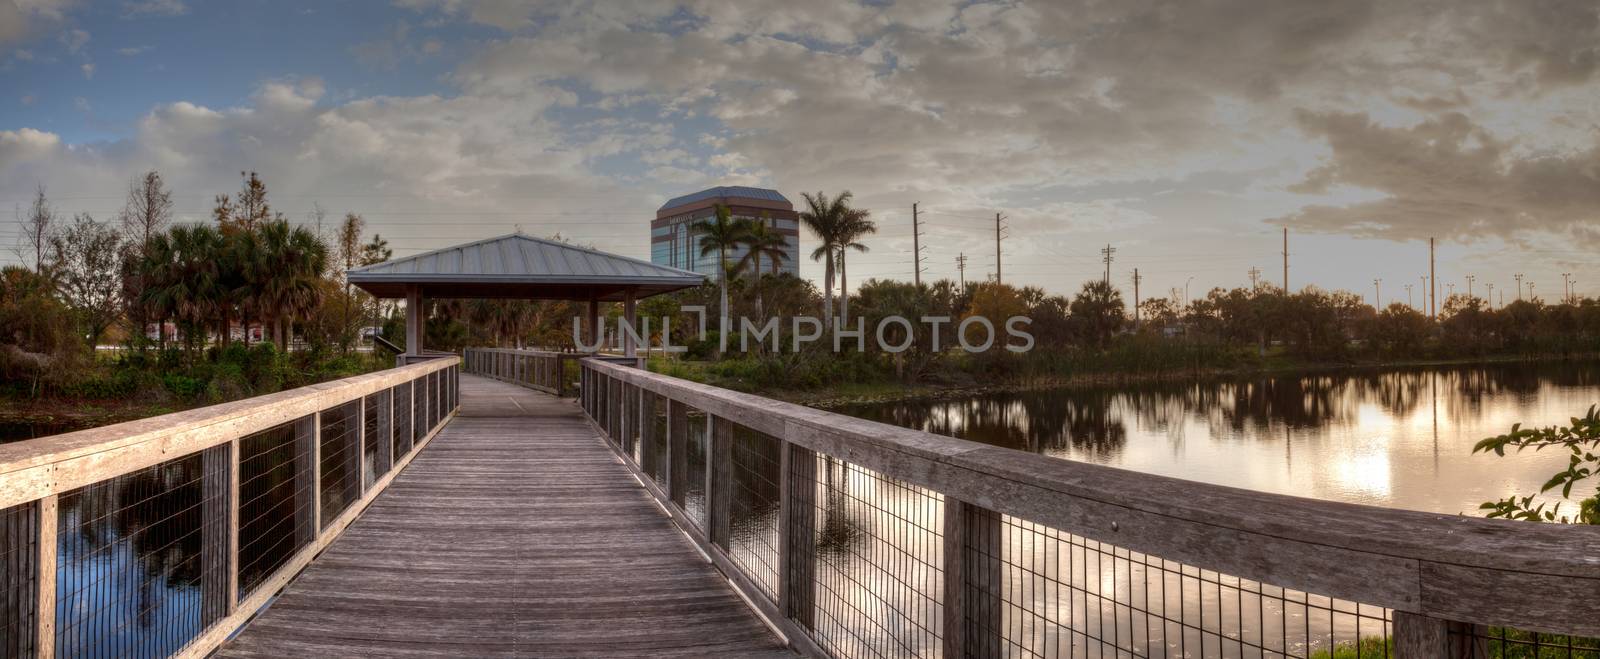 Sunset over Gazebo on a wooden secluded, tranquil boardwalk by steffstarr